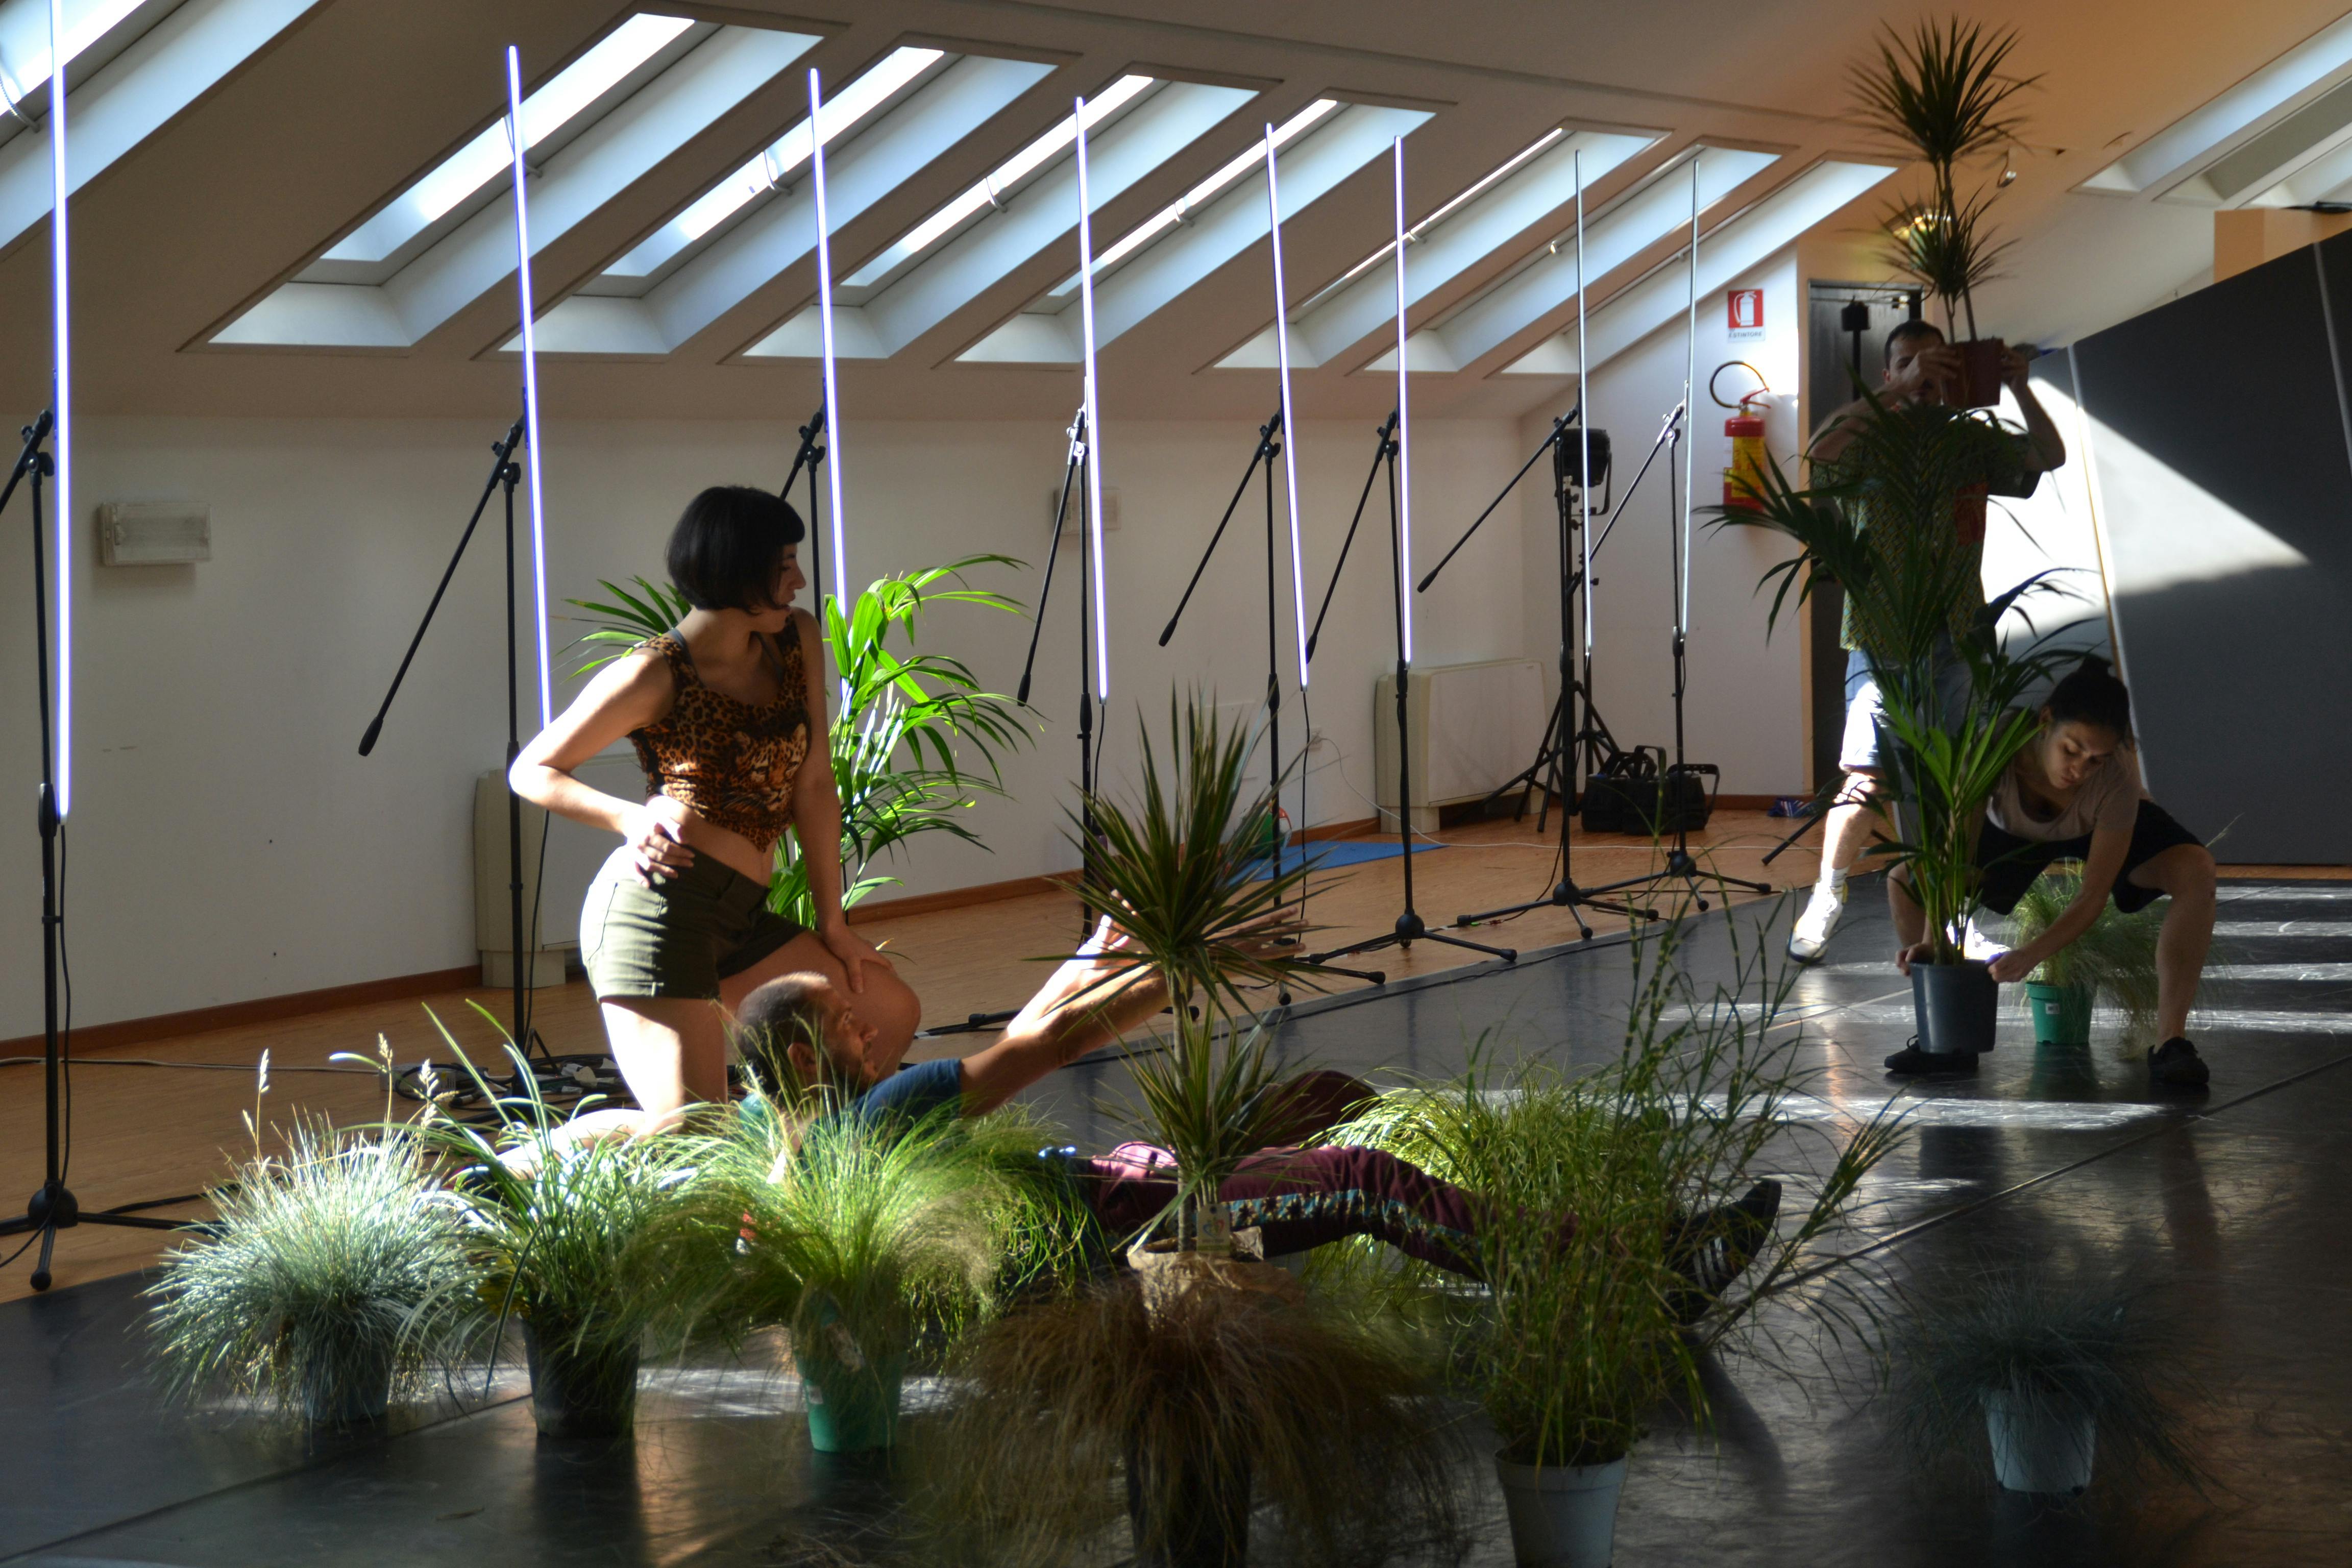 Three performers of Salvo lombardo dance with pots of plants